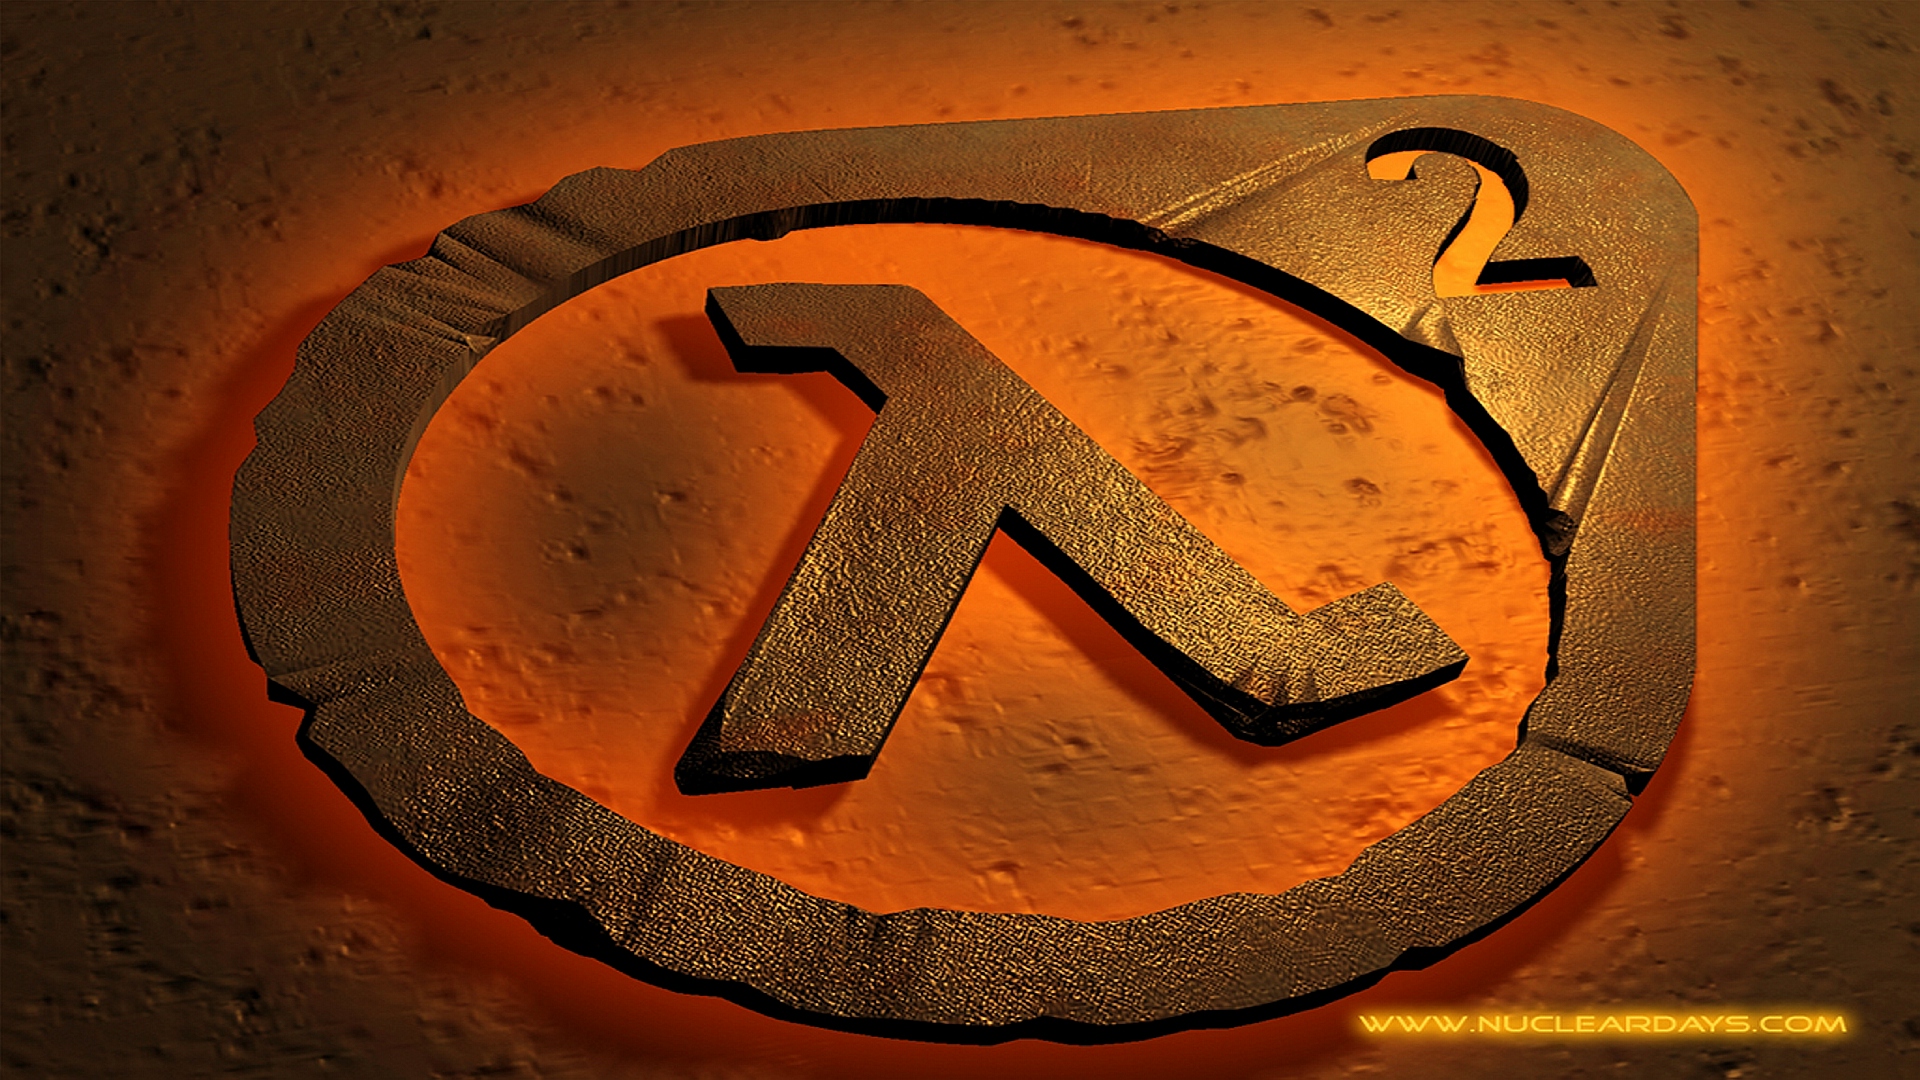 Nuclear Half Life HD Wallpaper Background